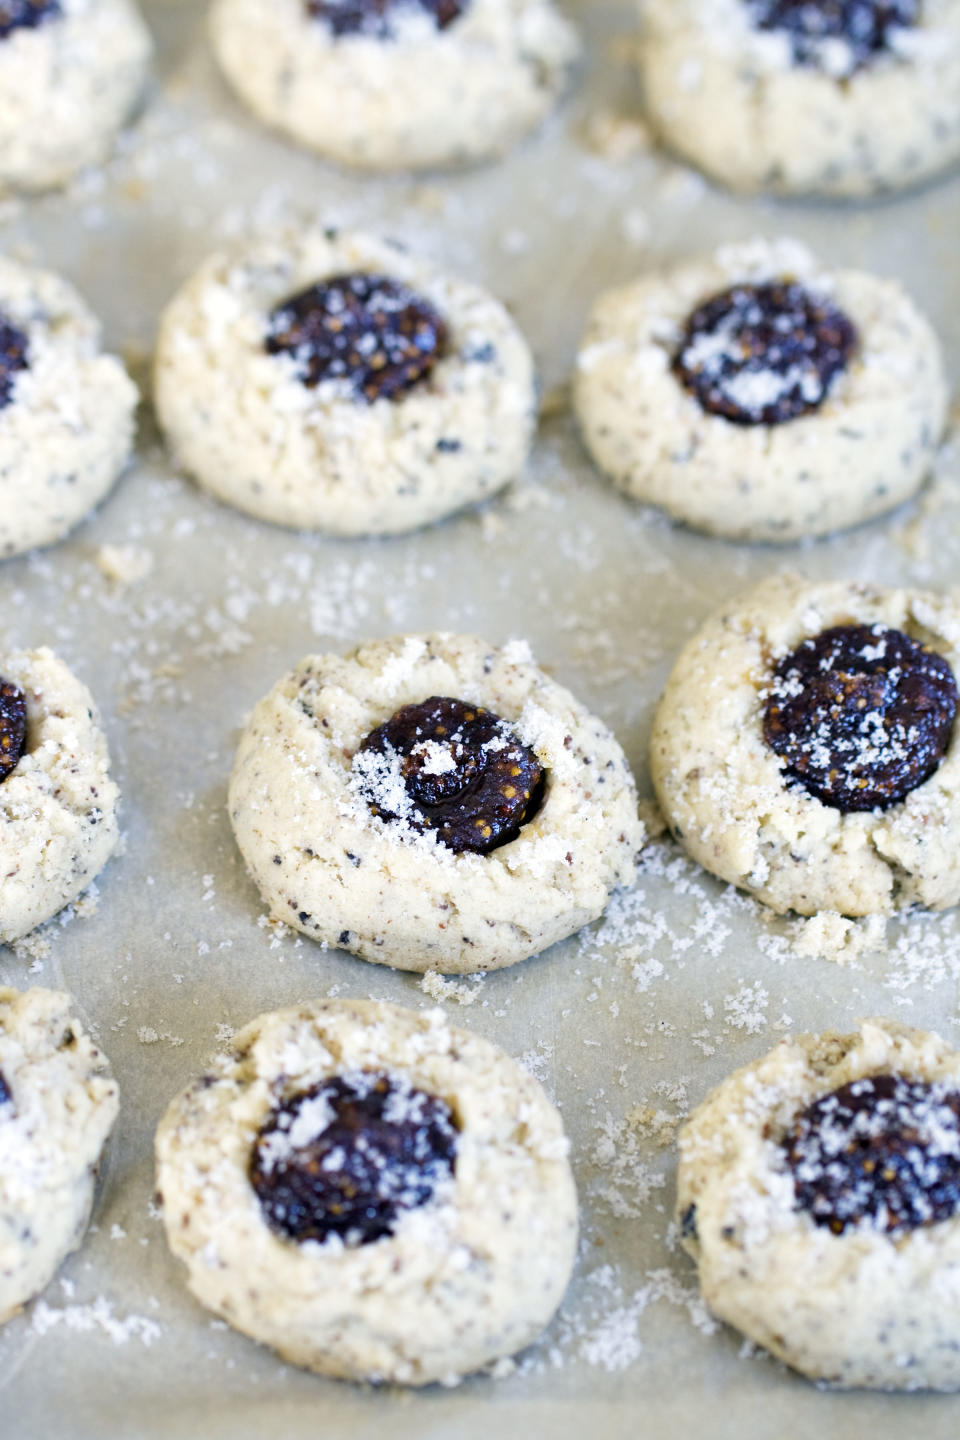 This Sept. 16, 2013 photo shows brown butter fig thumbprint cookies in Concord, N.H. (AP Photo/Matthew Mead)